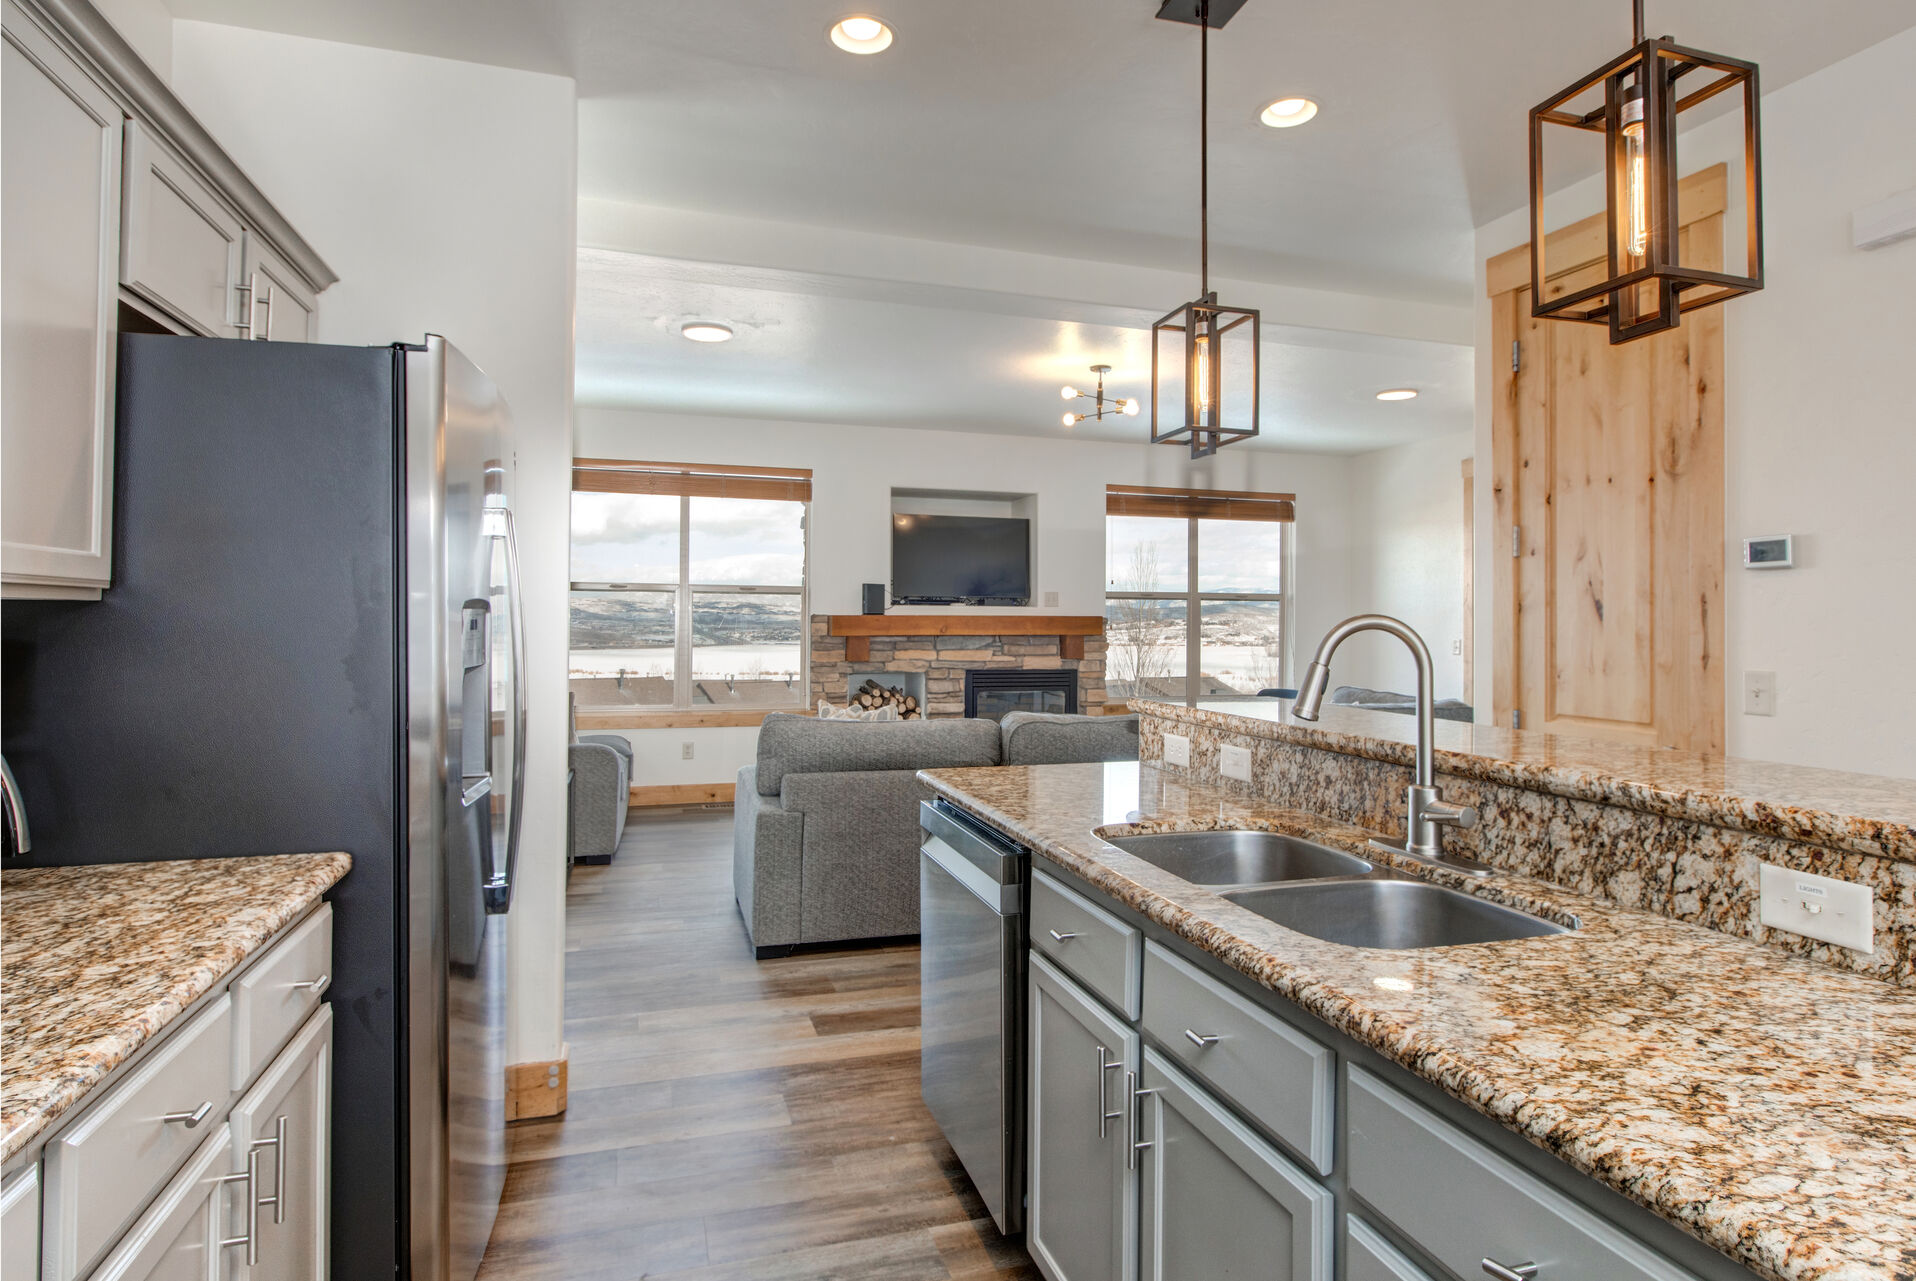 Fully Equipped, gourmet kitchen with beautiful stone countertops, separate island, ample prep space, stainless steel appliances, icee-maker, and bar seating for four